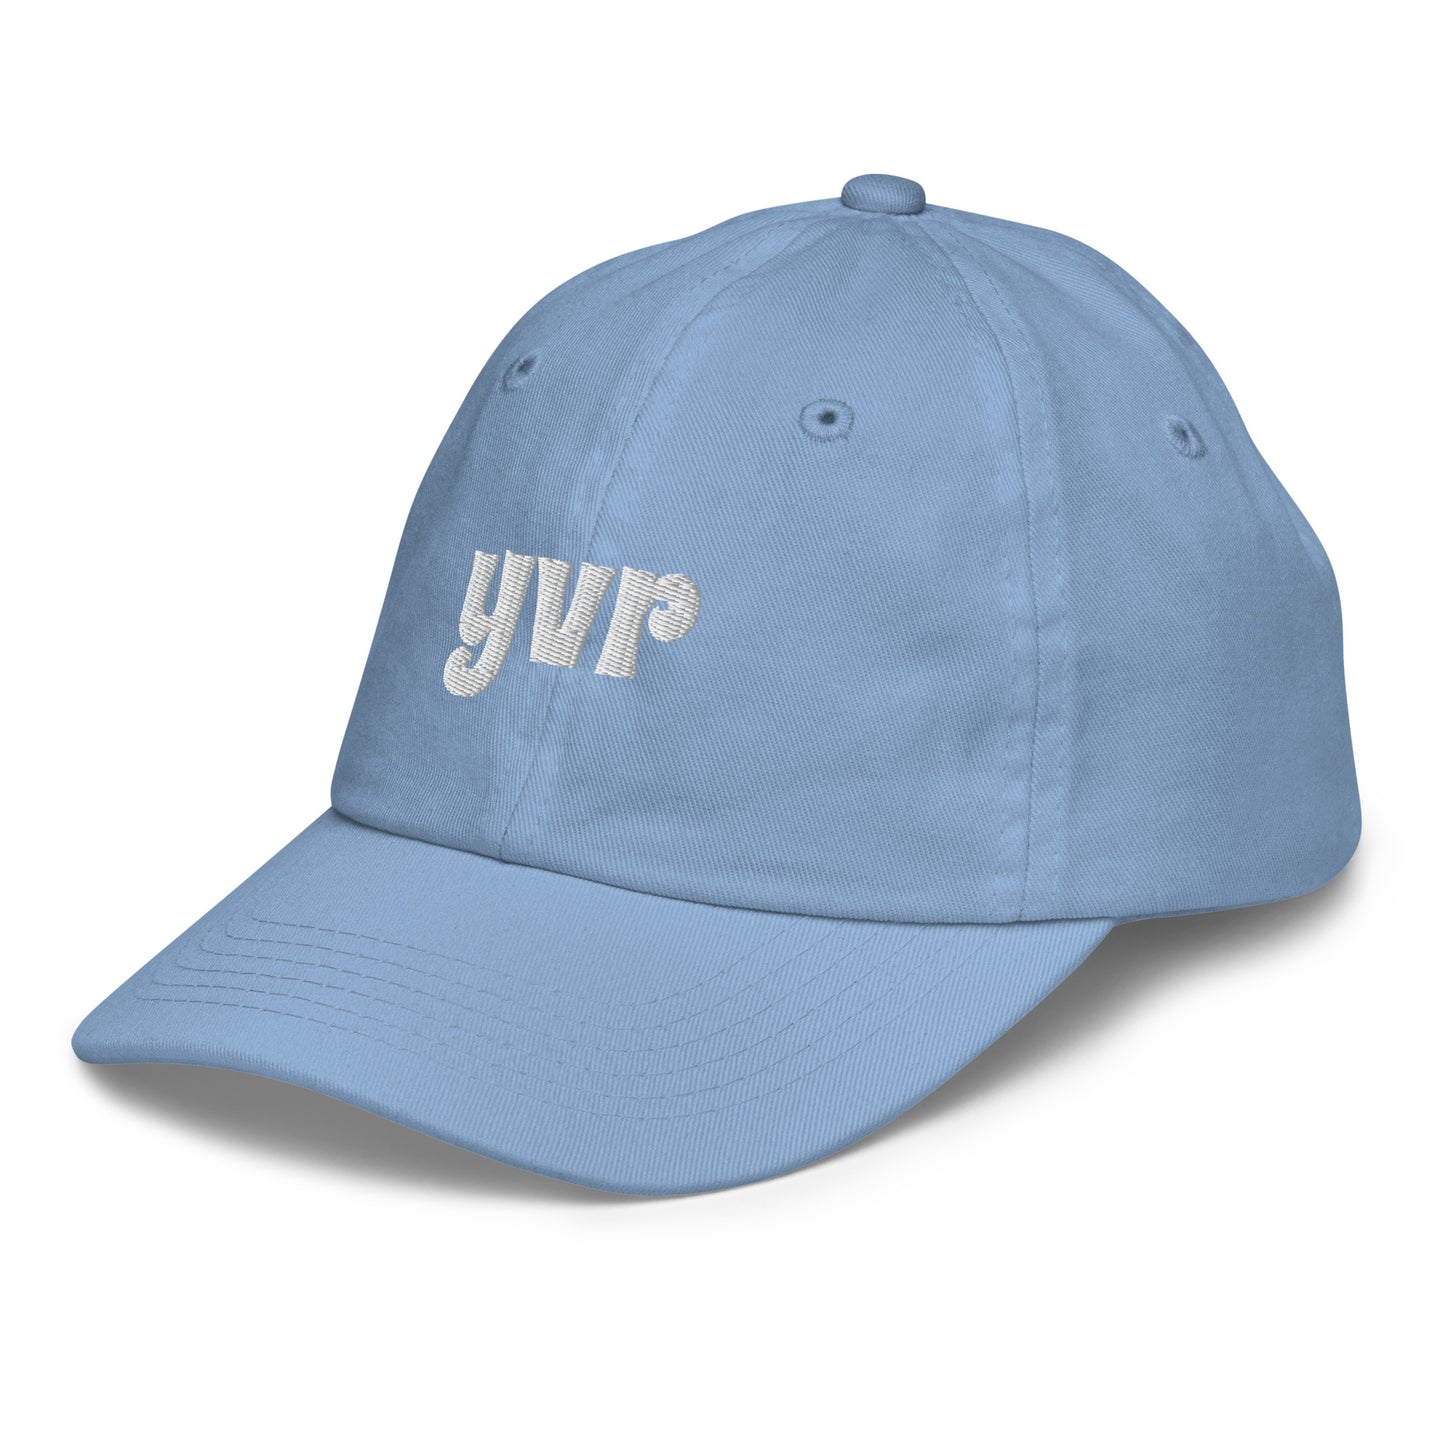 Groovy Kid's Baseball Cap - White • YVR Vancouver • YHM Designs - Image 18